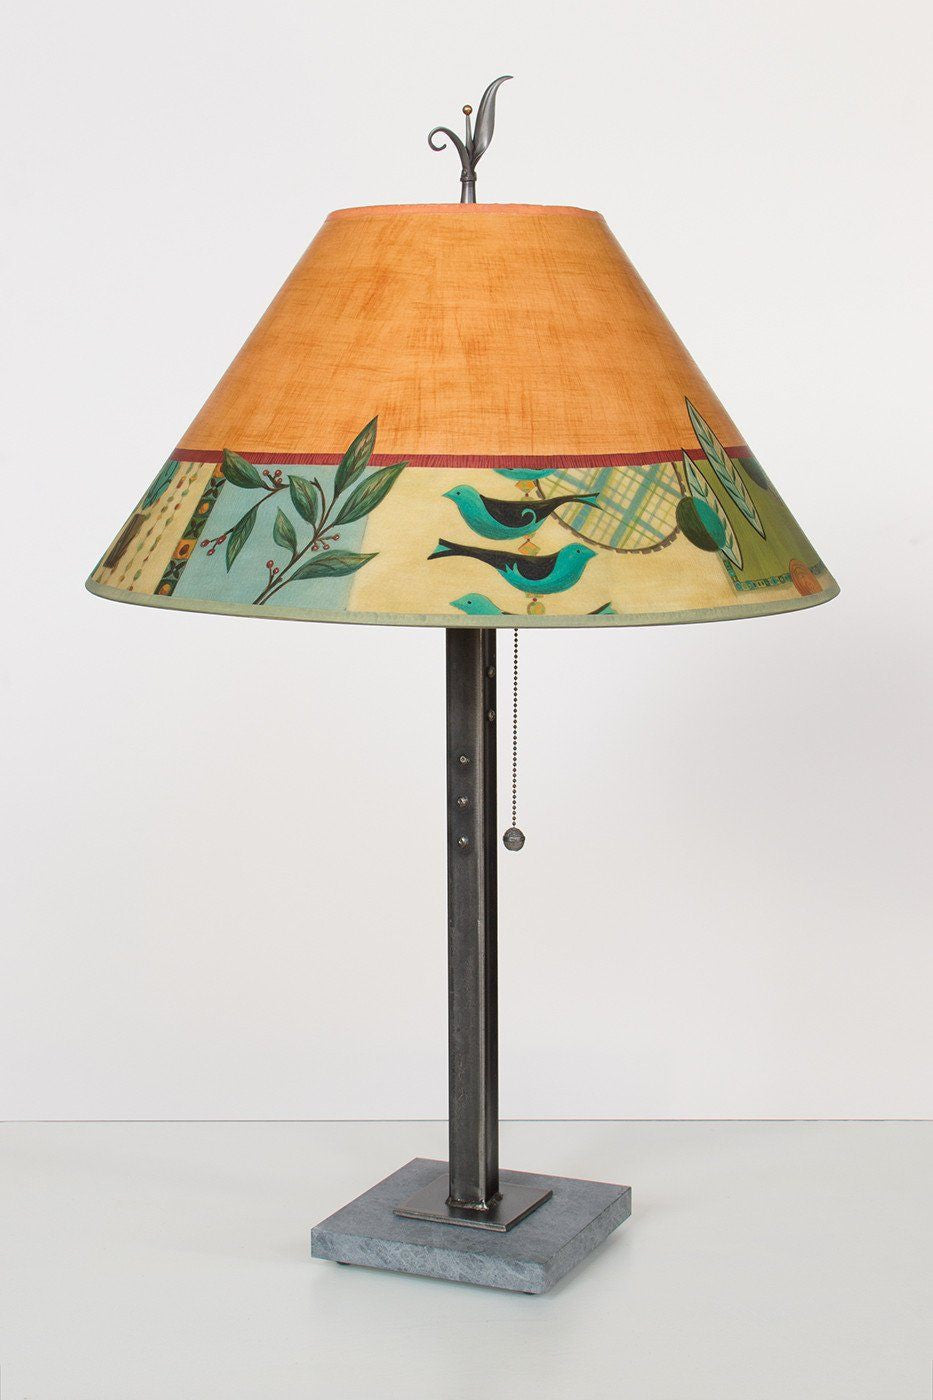 Janna Ugone &amp; Co Table Lamps Steel Table Lamp with Large Conical Shade in New Capri Spice